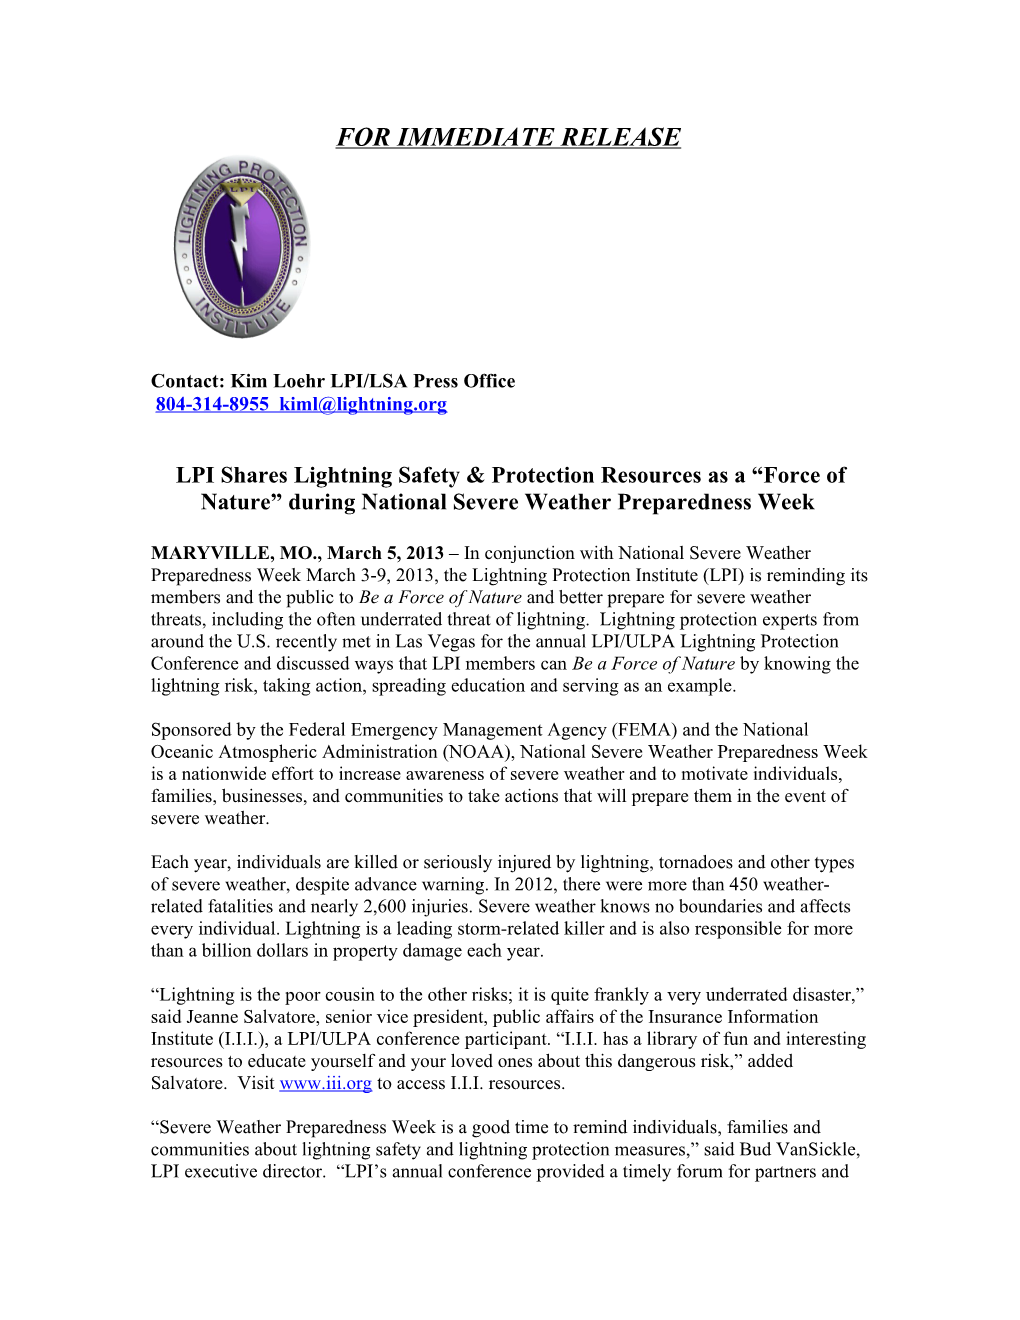 The Lightning Protection Institute Is a Force of Nature and You Can Be Too